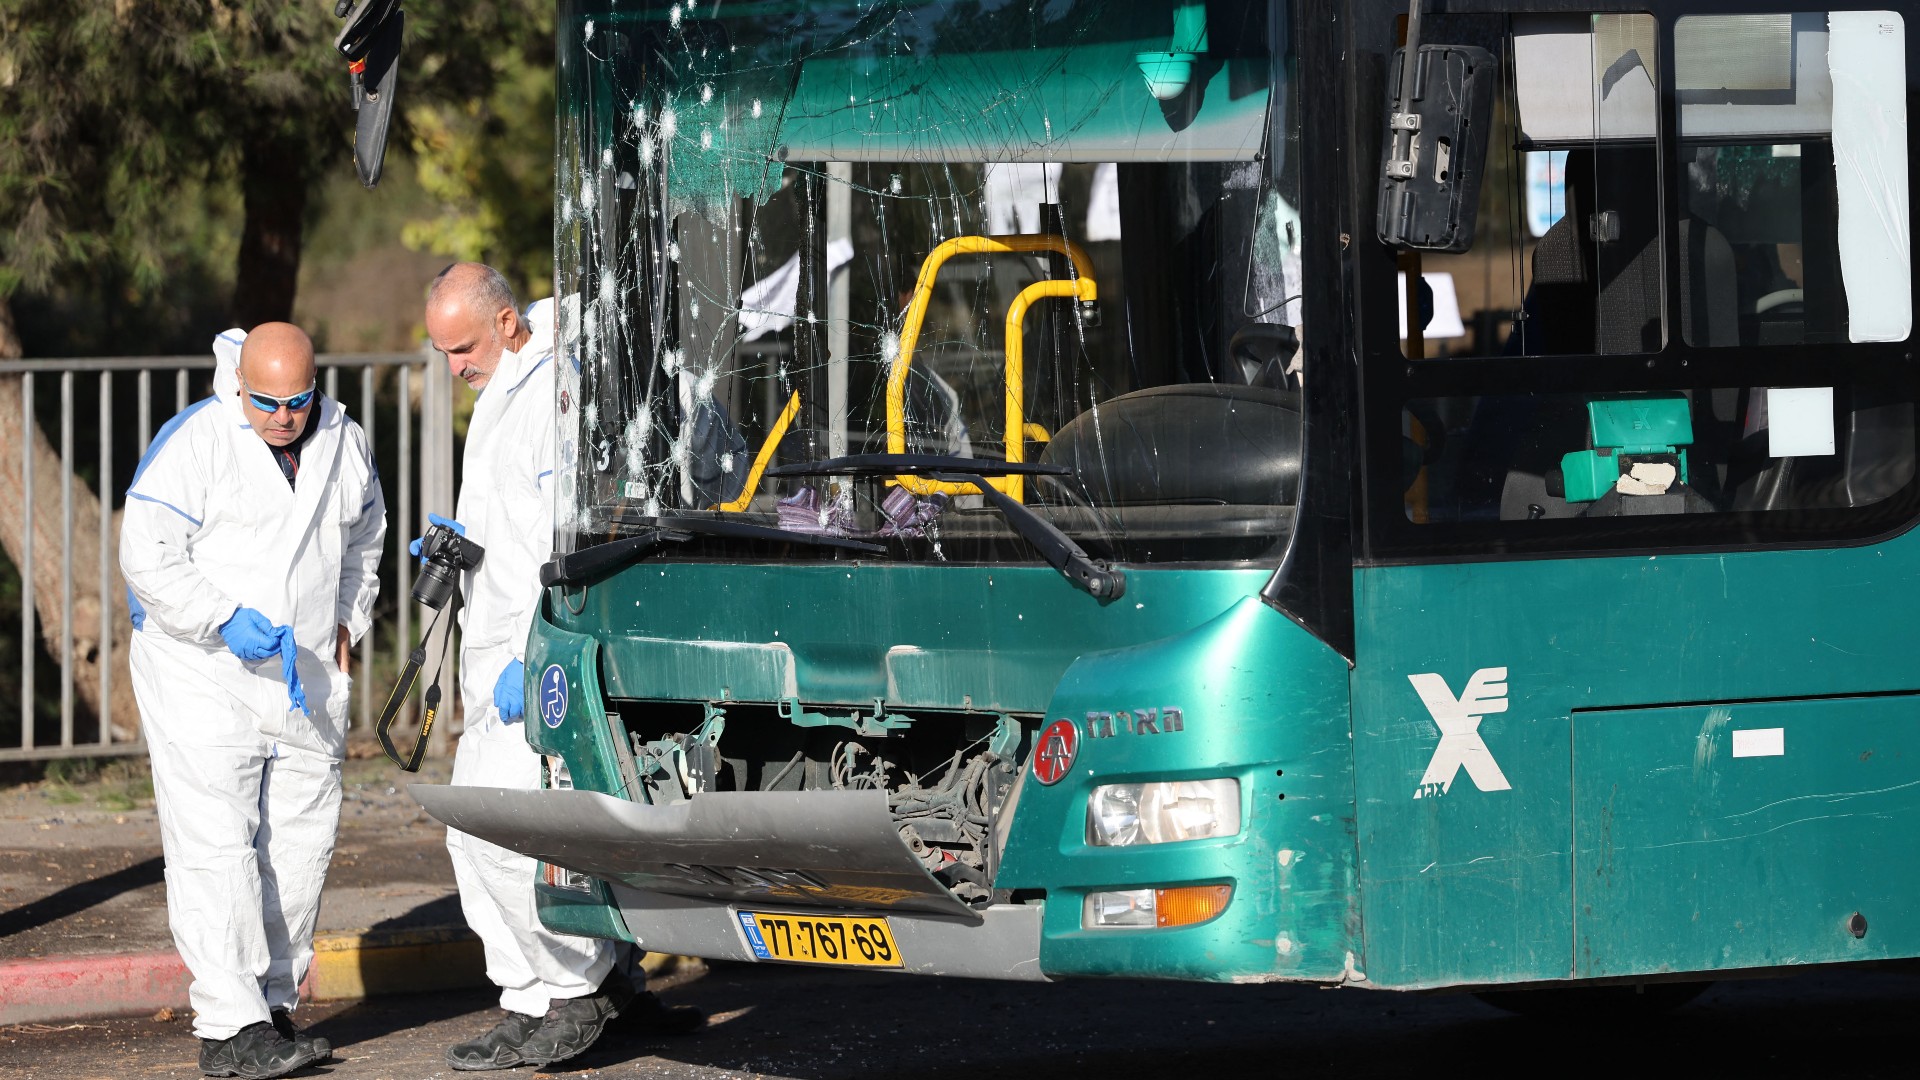 Jerusalem: One dead and several wounded in twin explosions